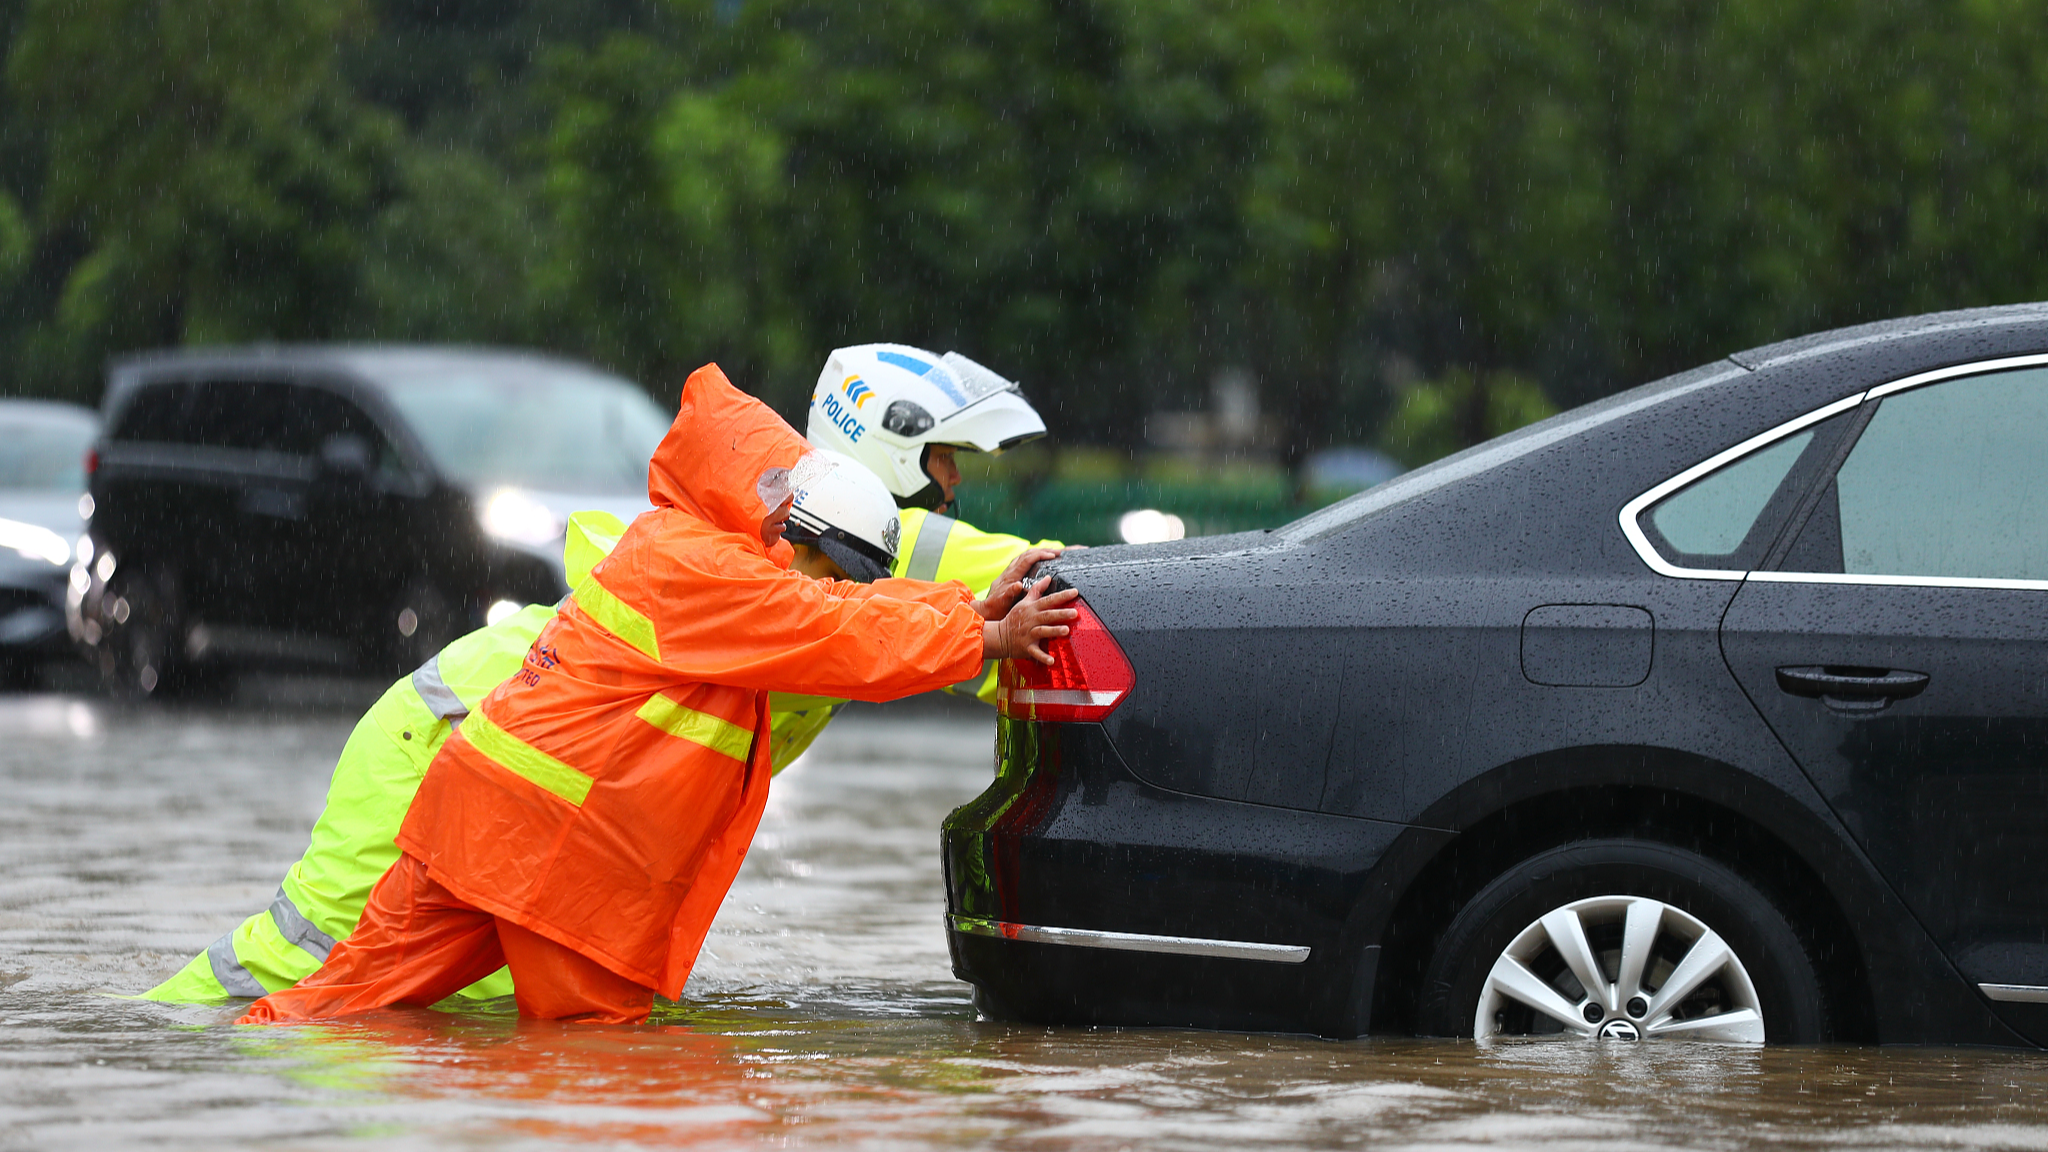 On June 24, 2024, in Nanchang City of east China's Jiangxi Province, police and a sanitation worker were pushing a car that had stalled in the water. That morning, the Nanchang Meteorological Observatory issued a red alert for heavy rain, with torrential rains occurring in many parts of the city. /CFP